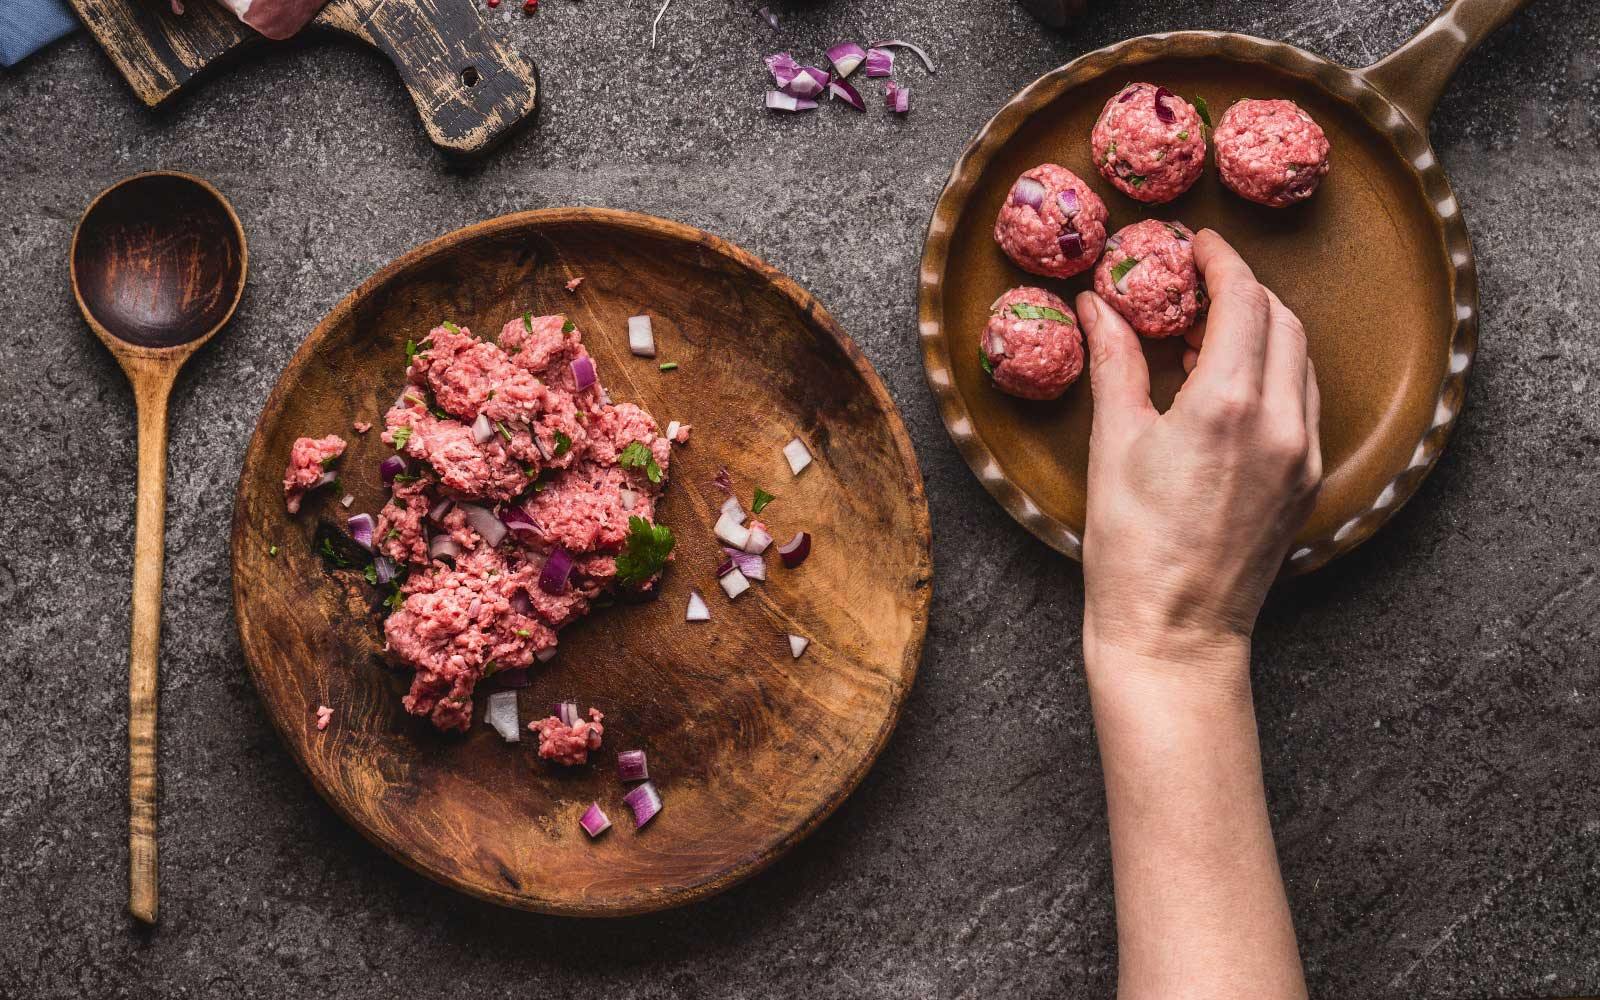 Our Tasty Ground Bison Meatball Recipe: Oven Roasted Bison Meatballs - Buck Wild Bison